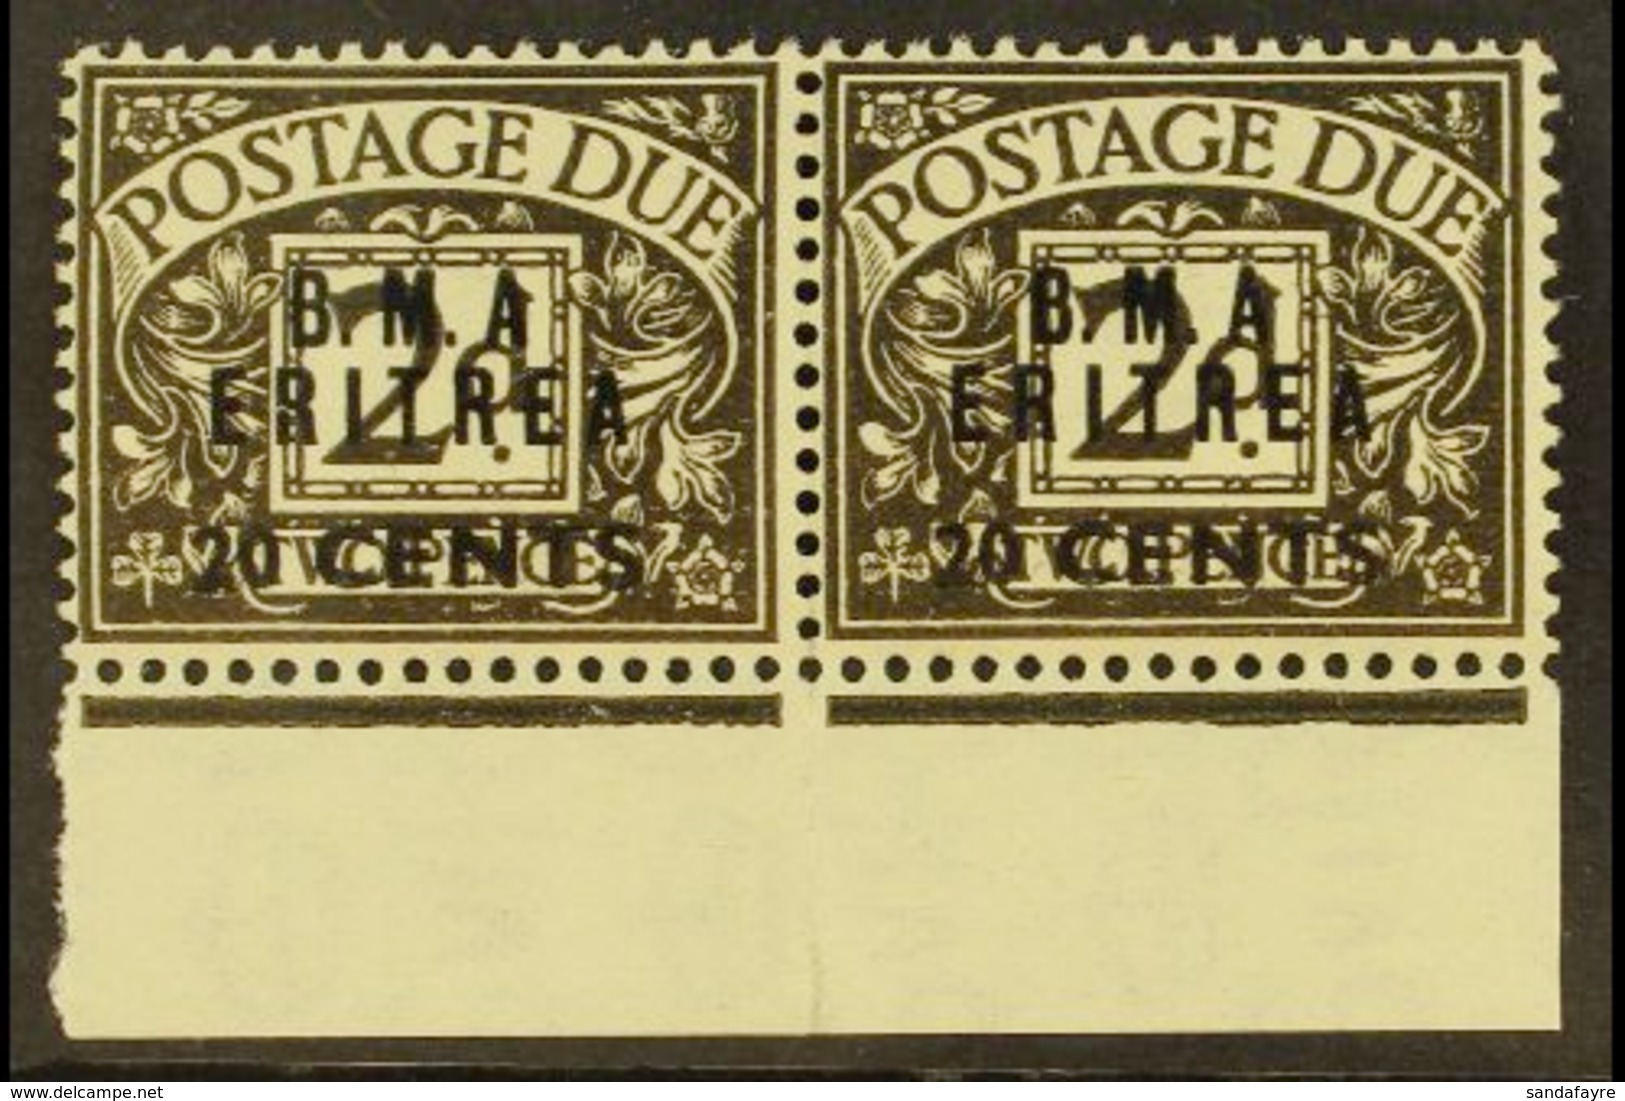 ERITREA  POSTAGE DUES 1948 20c On 2d Agate, Horizontal Pair Both Showing Variety "No Stop After A", SG ED 3a, Very Fine  - Italienisch Ost-Afrika